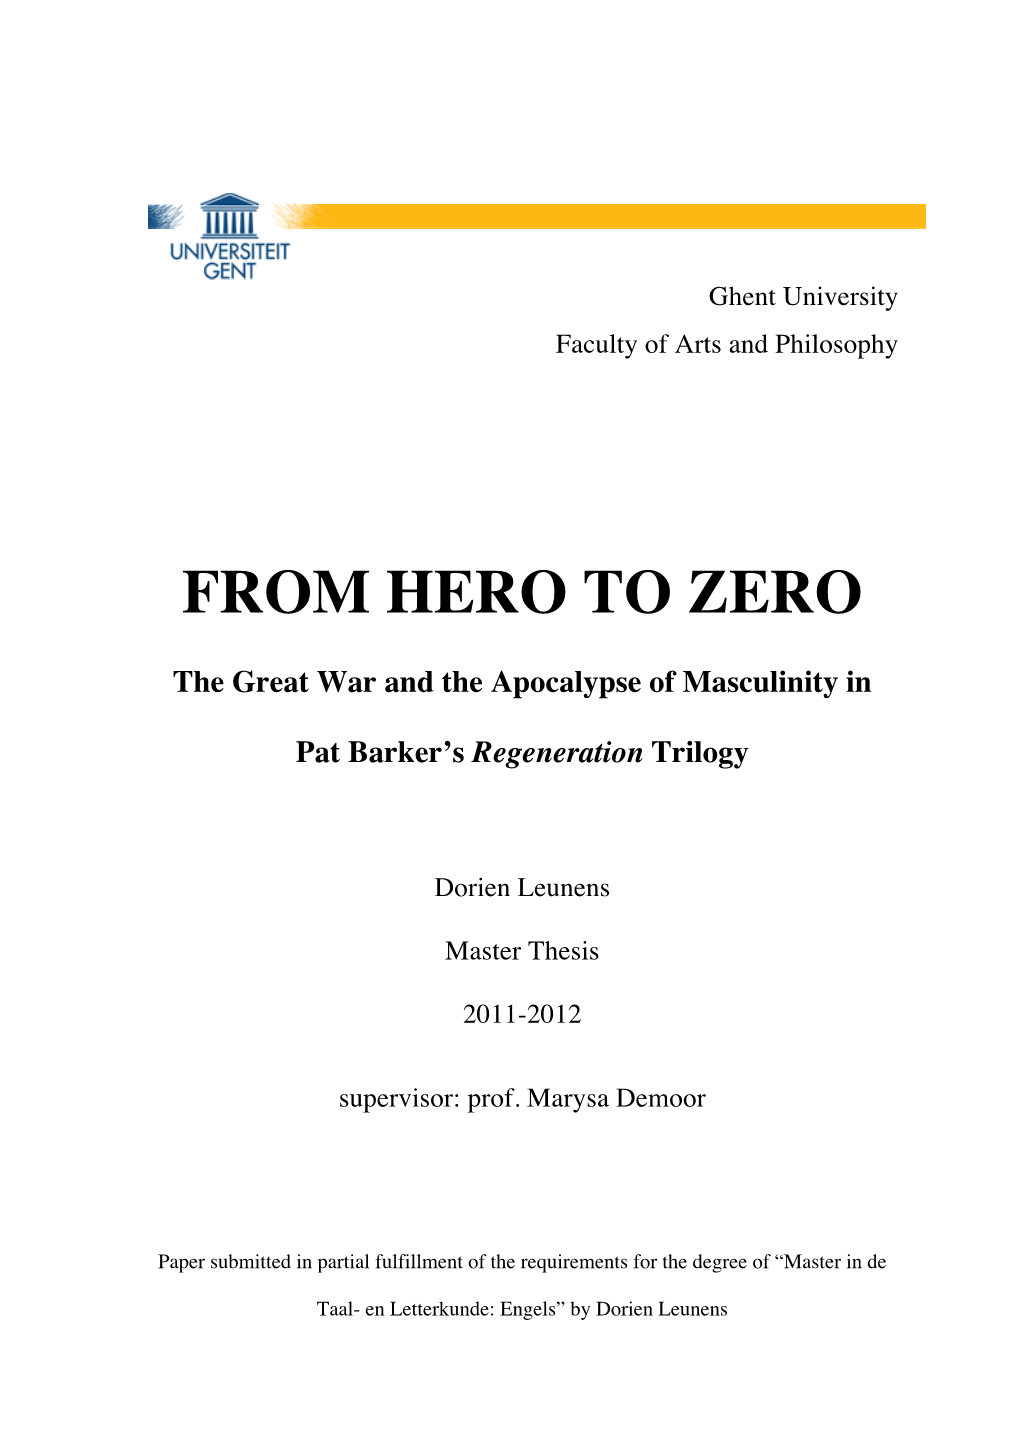 From Hero to Zero, the Great War and the Apocalypse of Masculinity